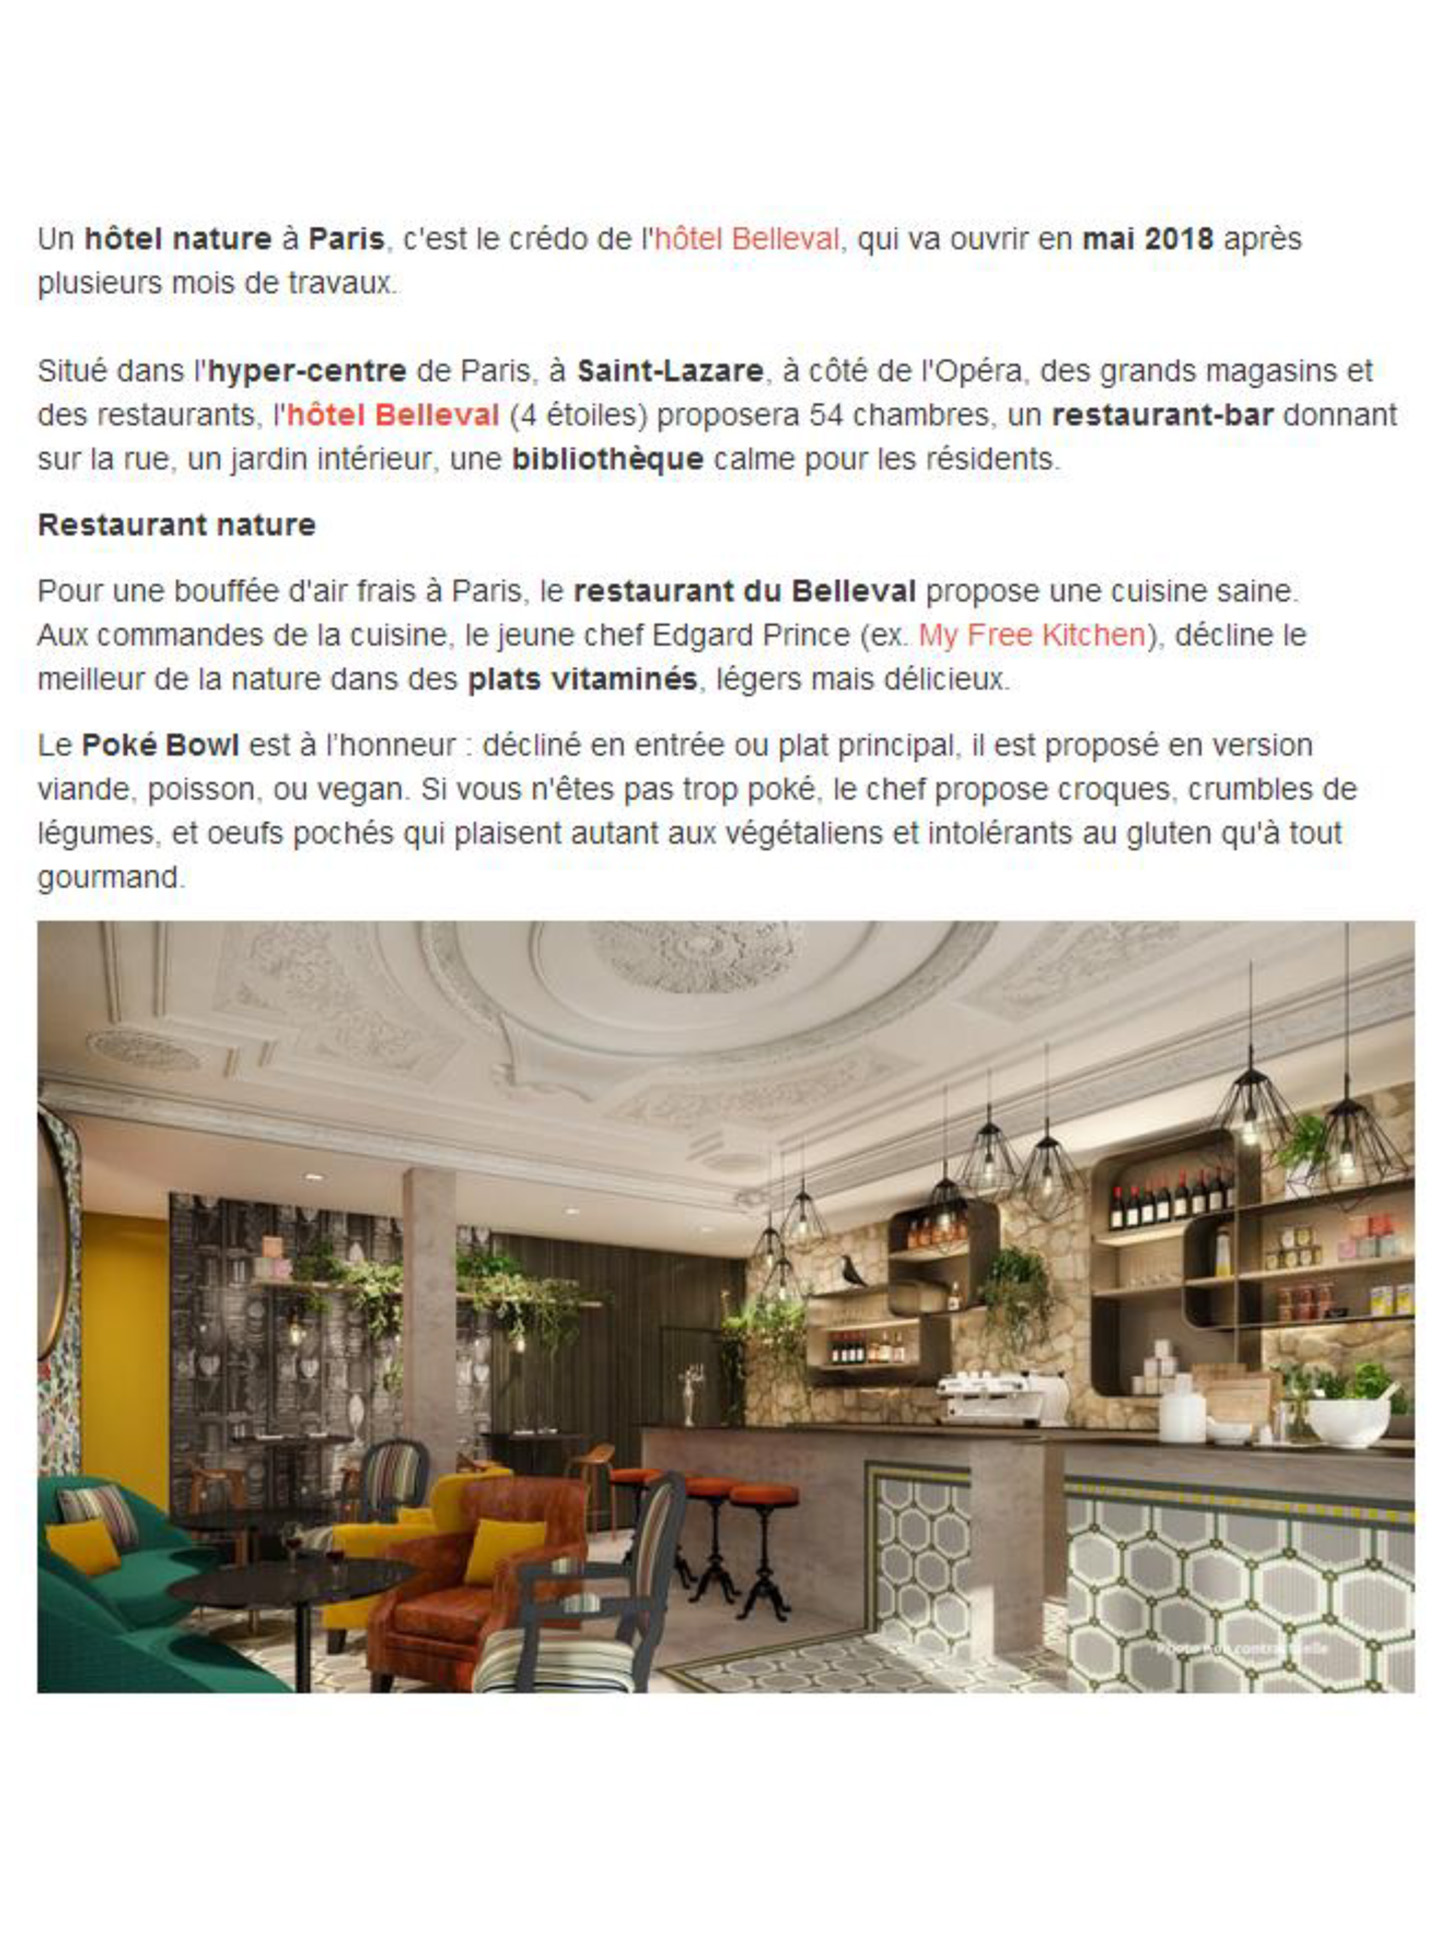 article on the belleval, lifestyle hotel designed by the interior design studio jean-philippe nuel, high-end parisian hotel